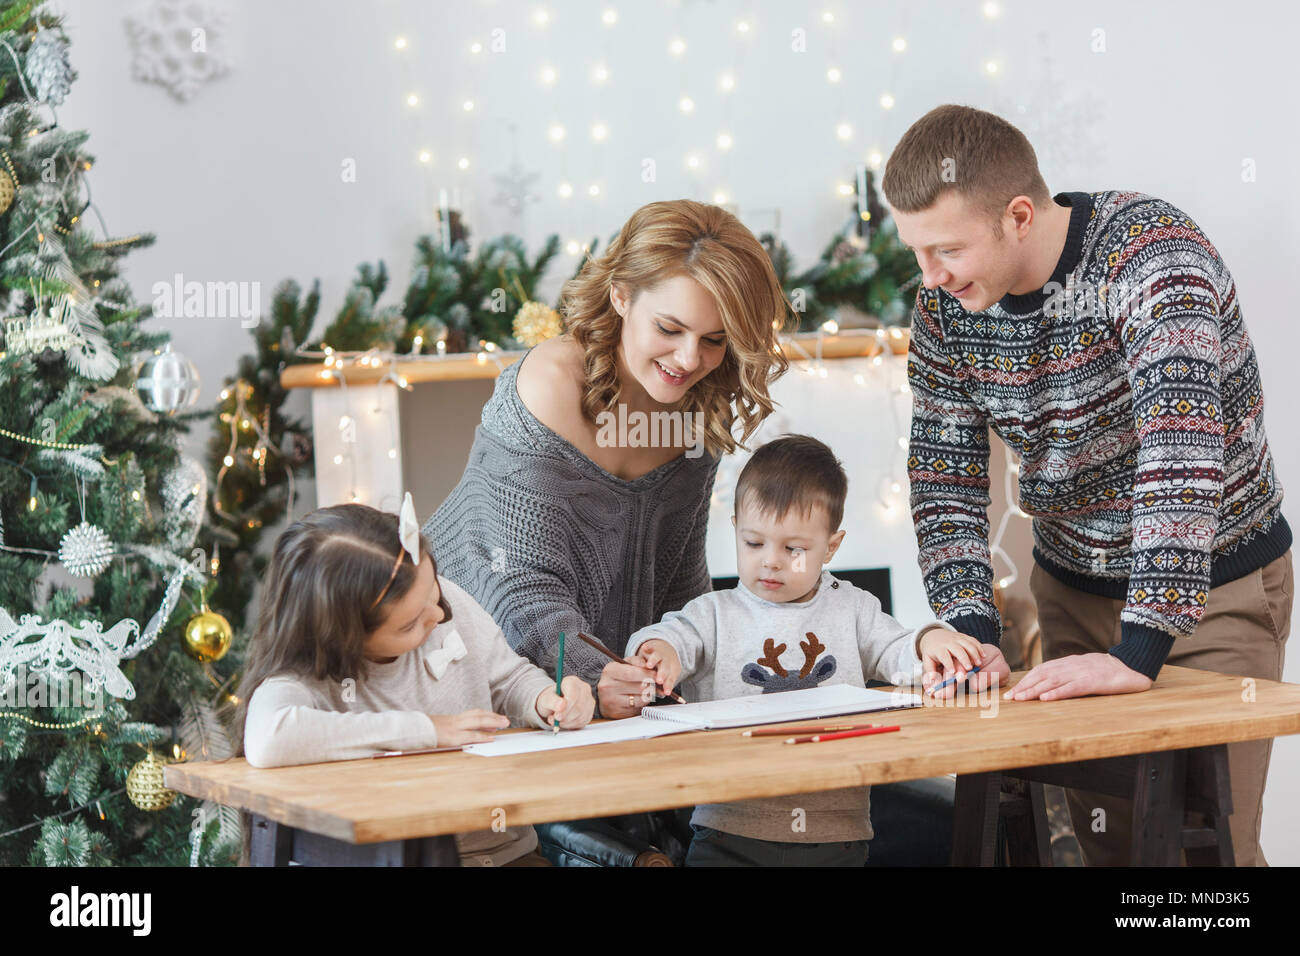 Man looking at woman and children drawing in book on table at home Stock Photo